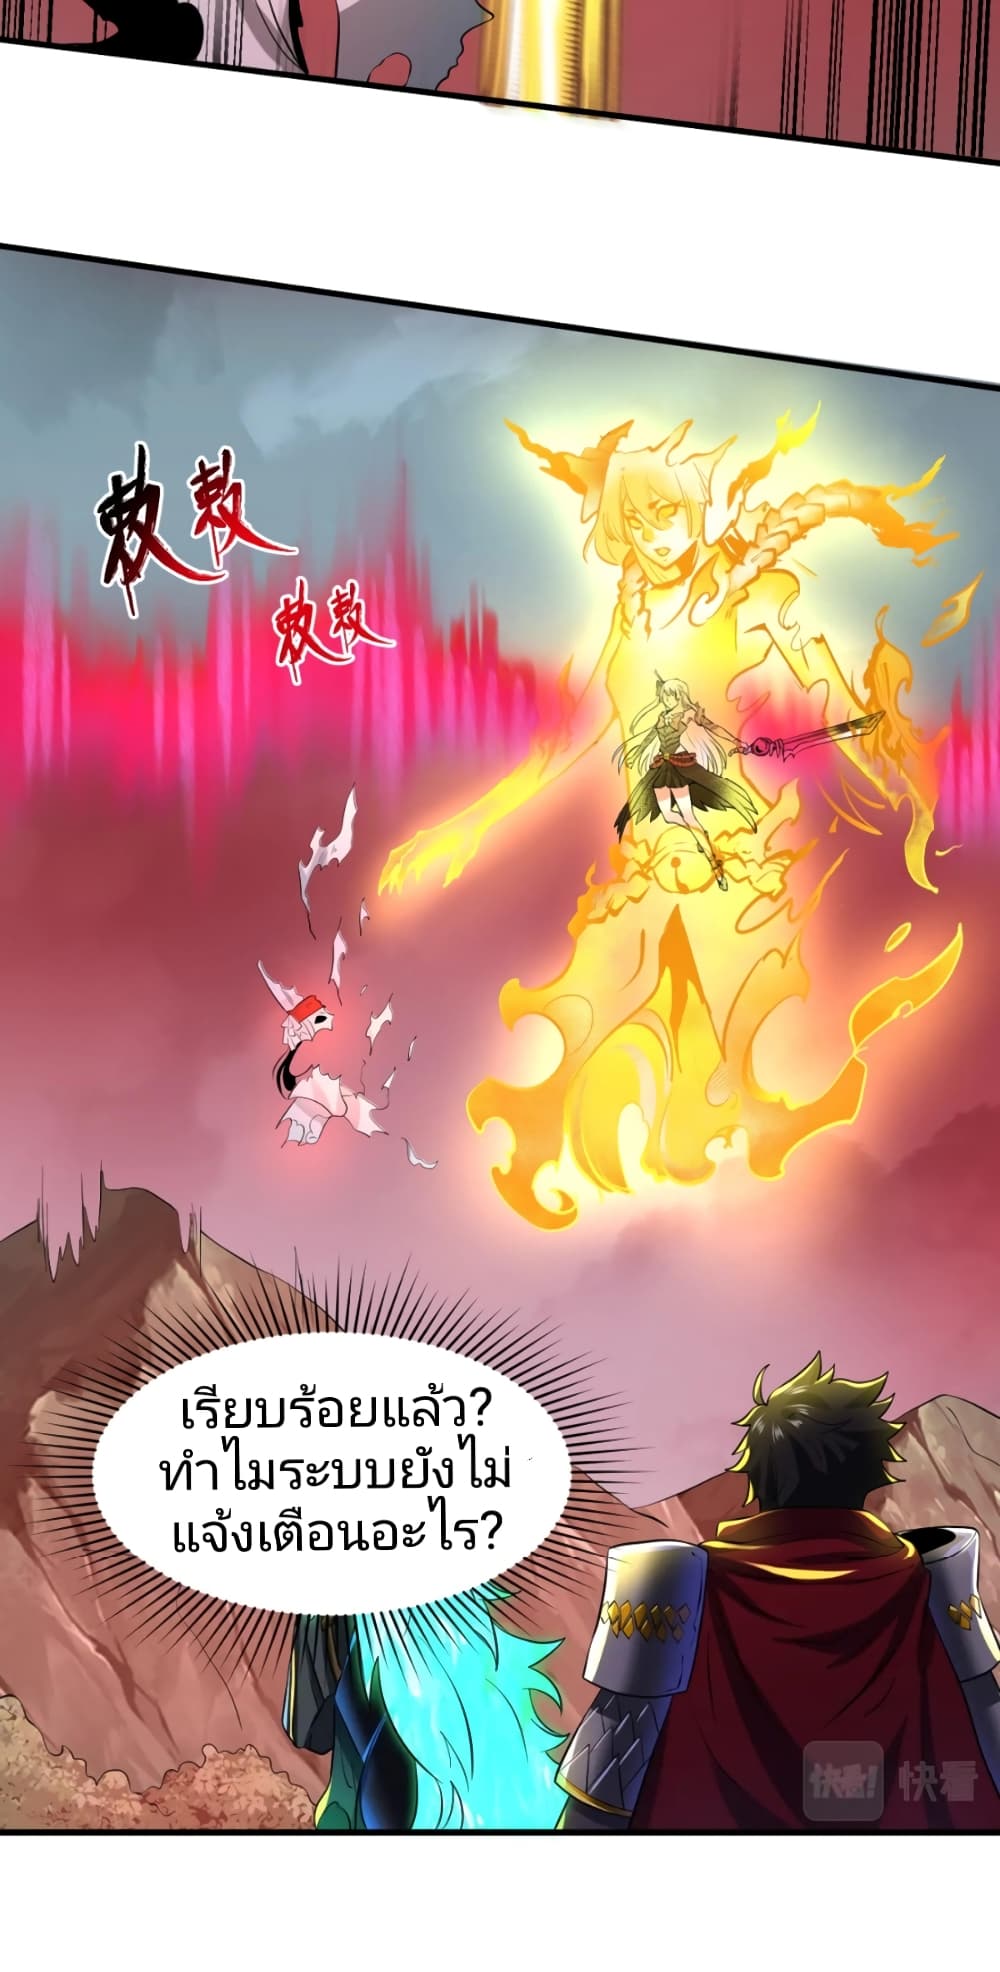 The Age of Ghost Spirits à¸à¸­à¸à¸à¸µà¹ 31 (11)